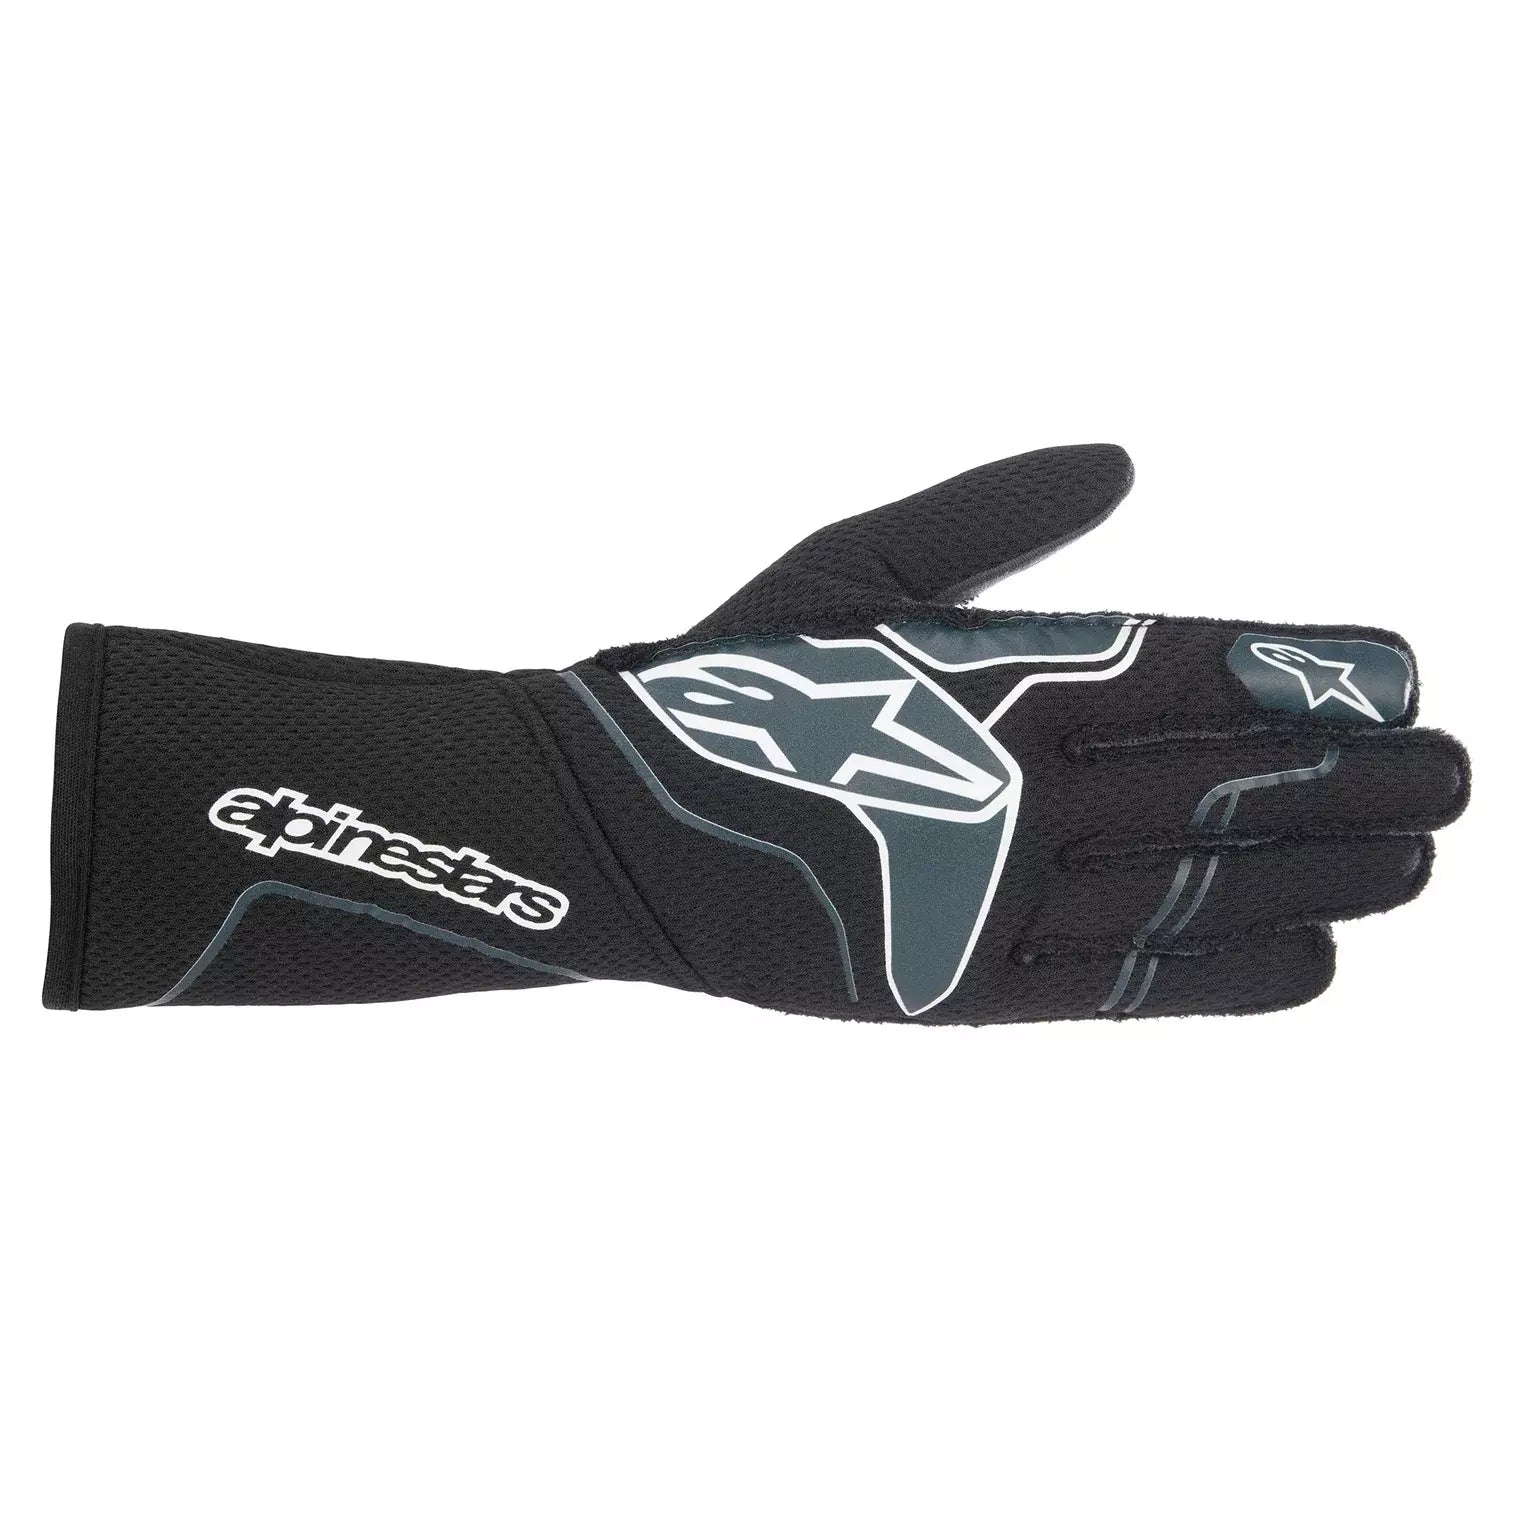 Alpinestars Gloves Tech 1-ZX Black / Grey Large Safety Clothing Driving Gloves main image